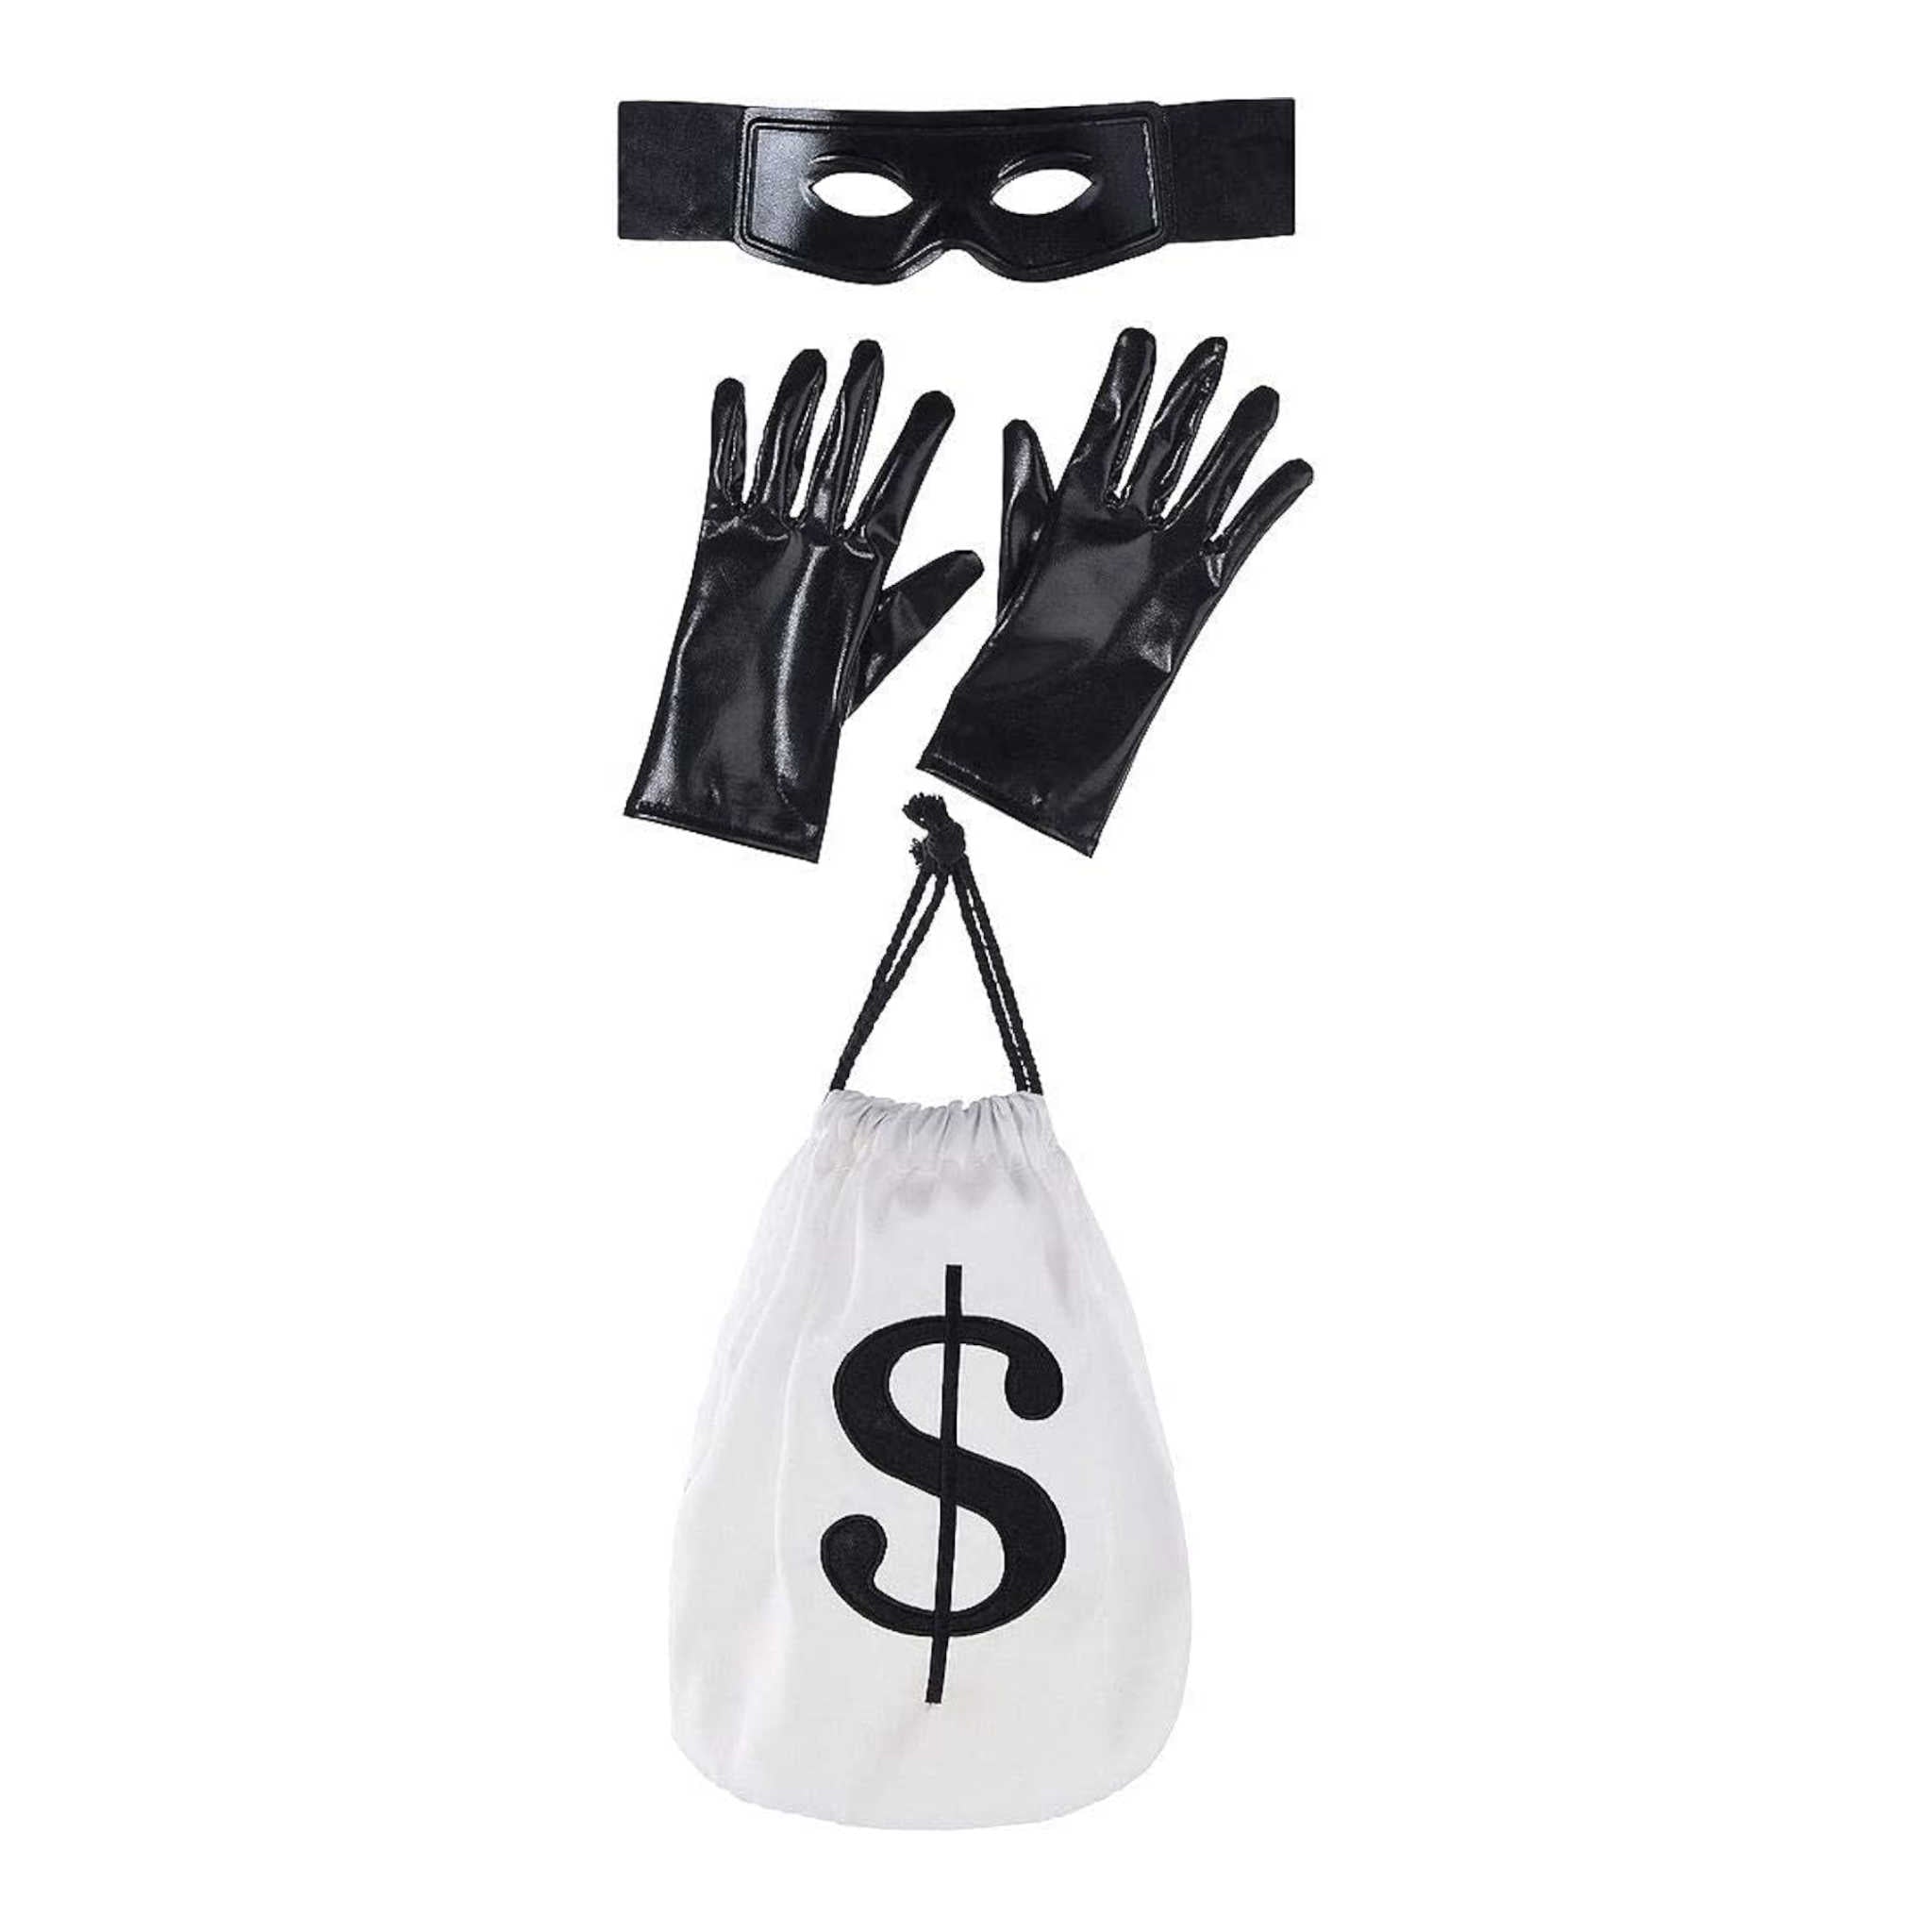 Bank Robber Money Bag Accessory Prop | Costume Accessories